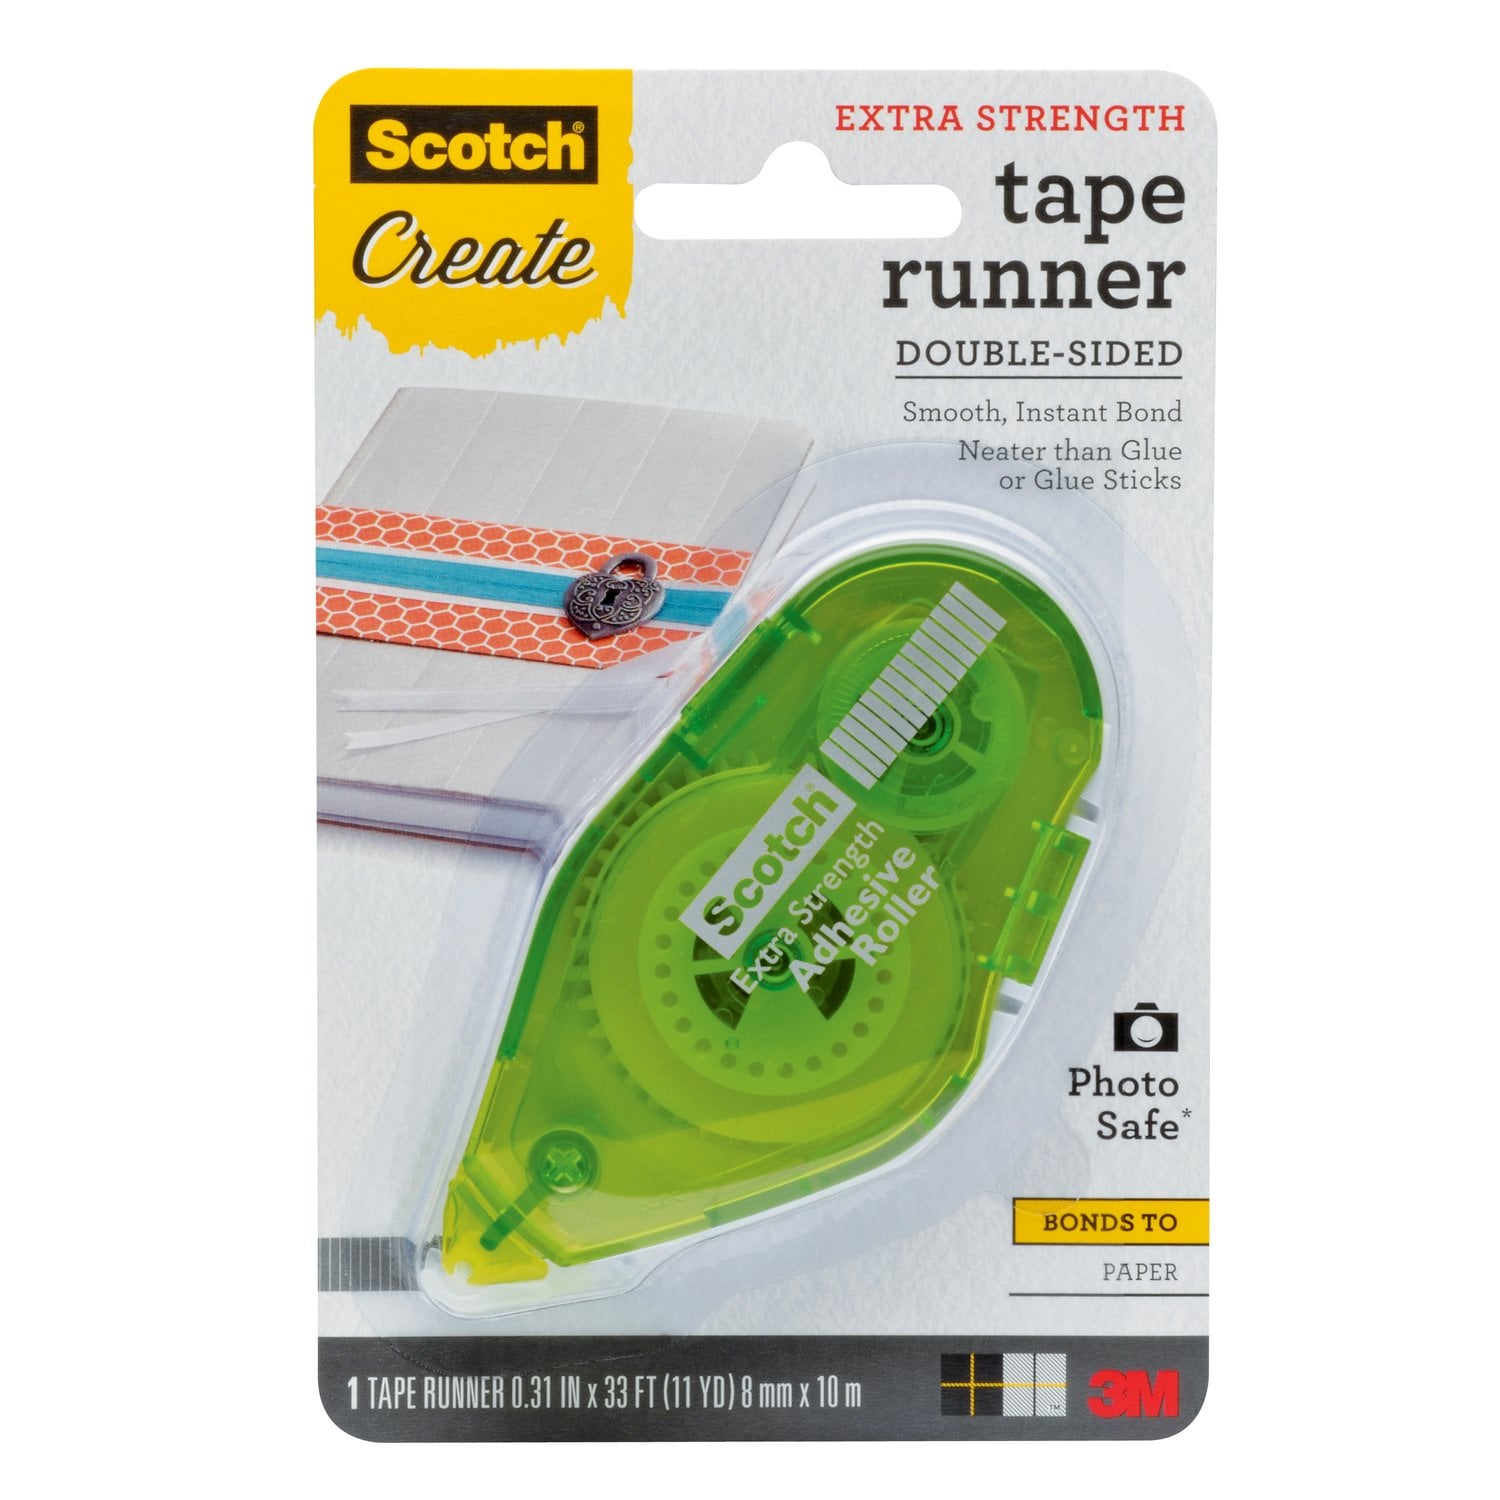 7100244116 - Scotch Tape Runner Extra Strength 055-ES-CFT, .31 in x 11 yd